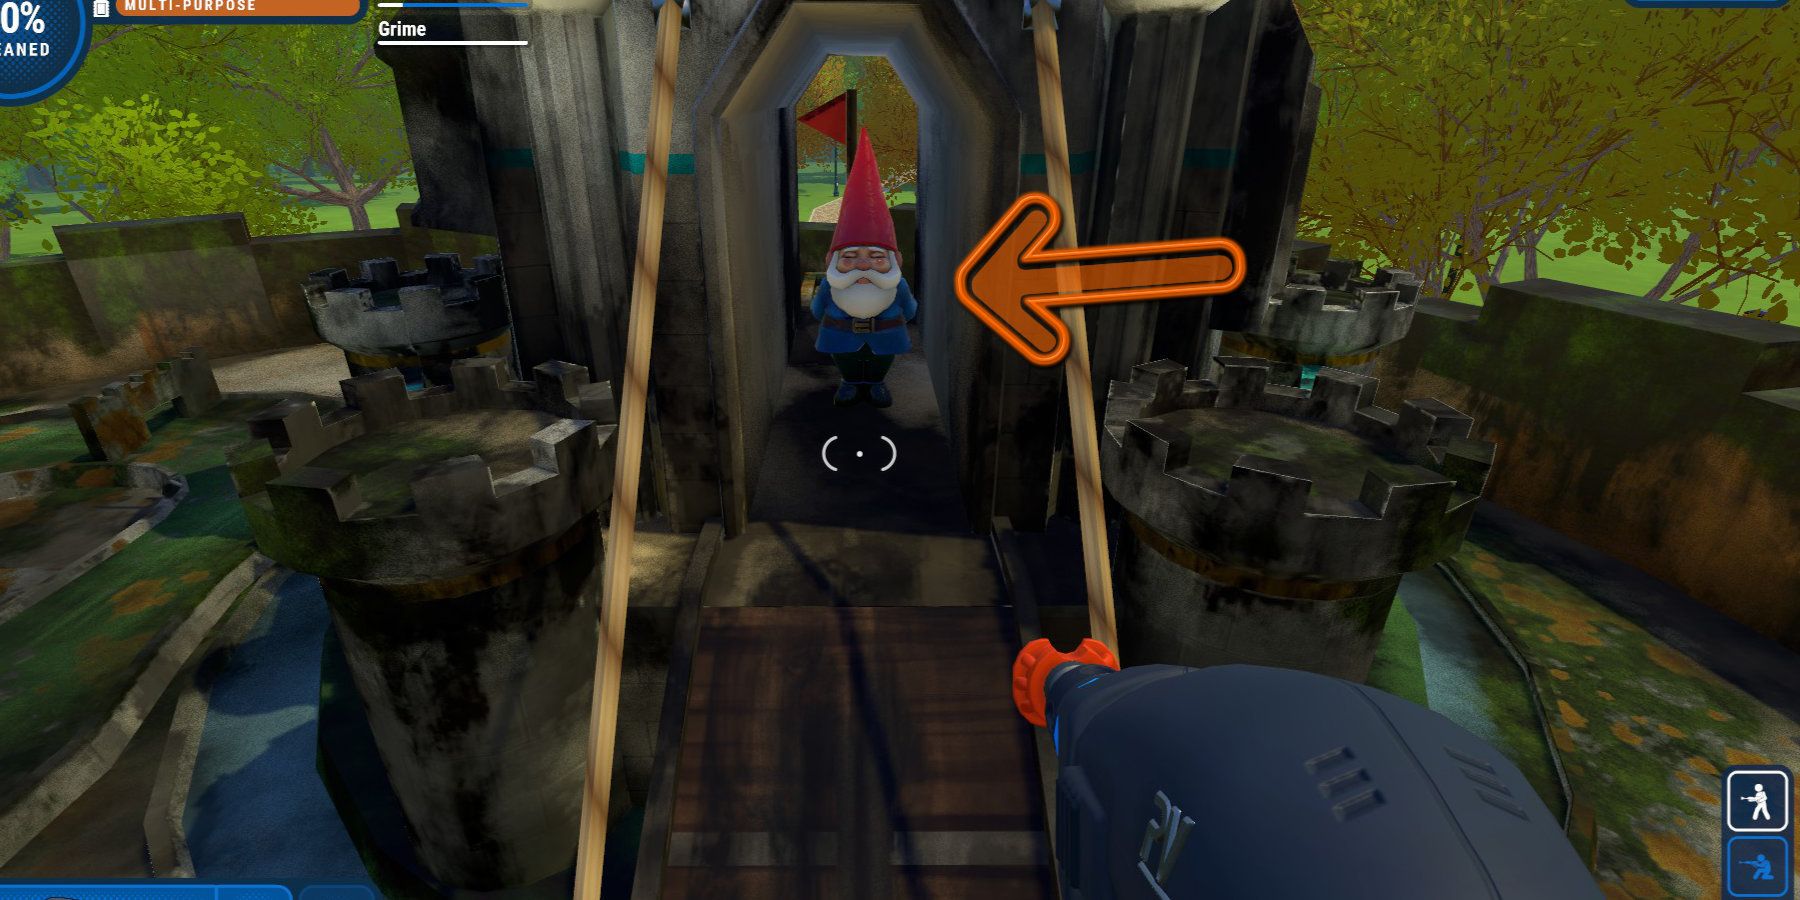 A garden gnome standing inside of a dirty mini golf castle prop, highlighted by an arrow.